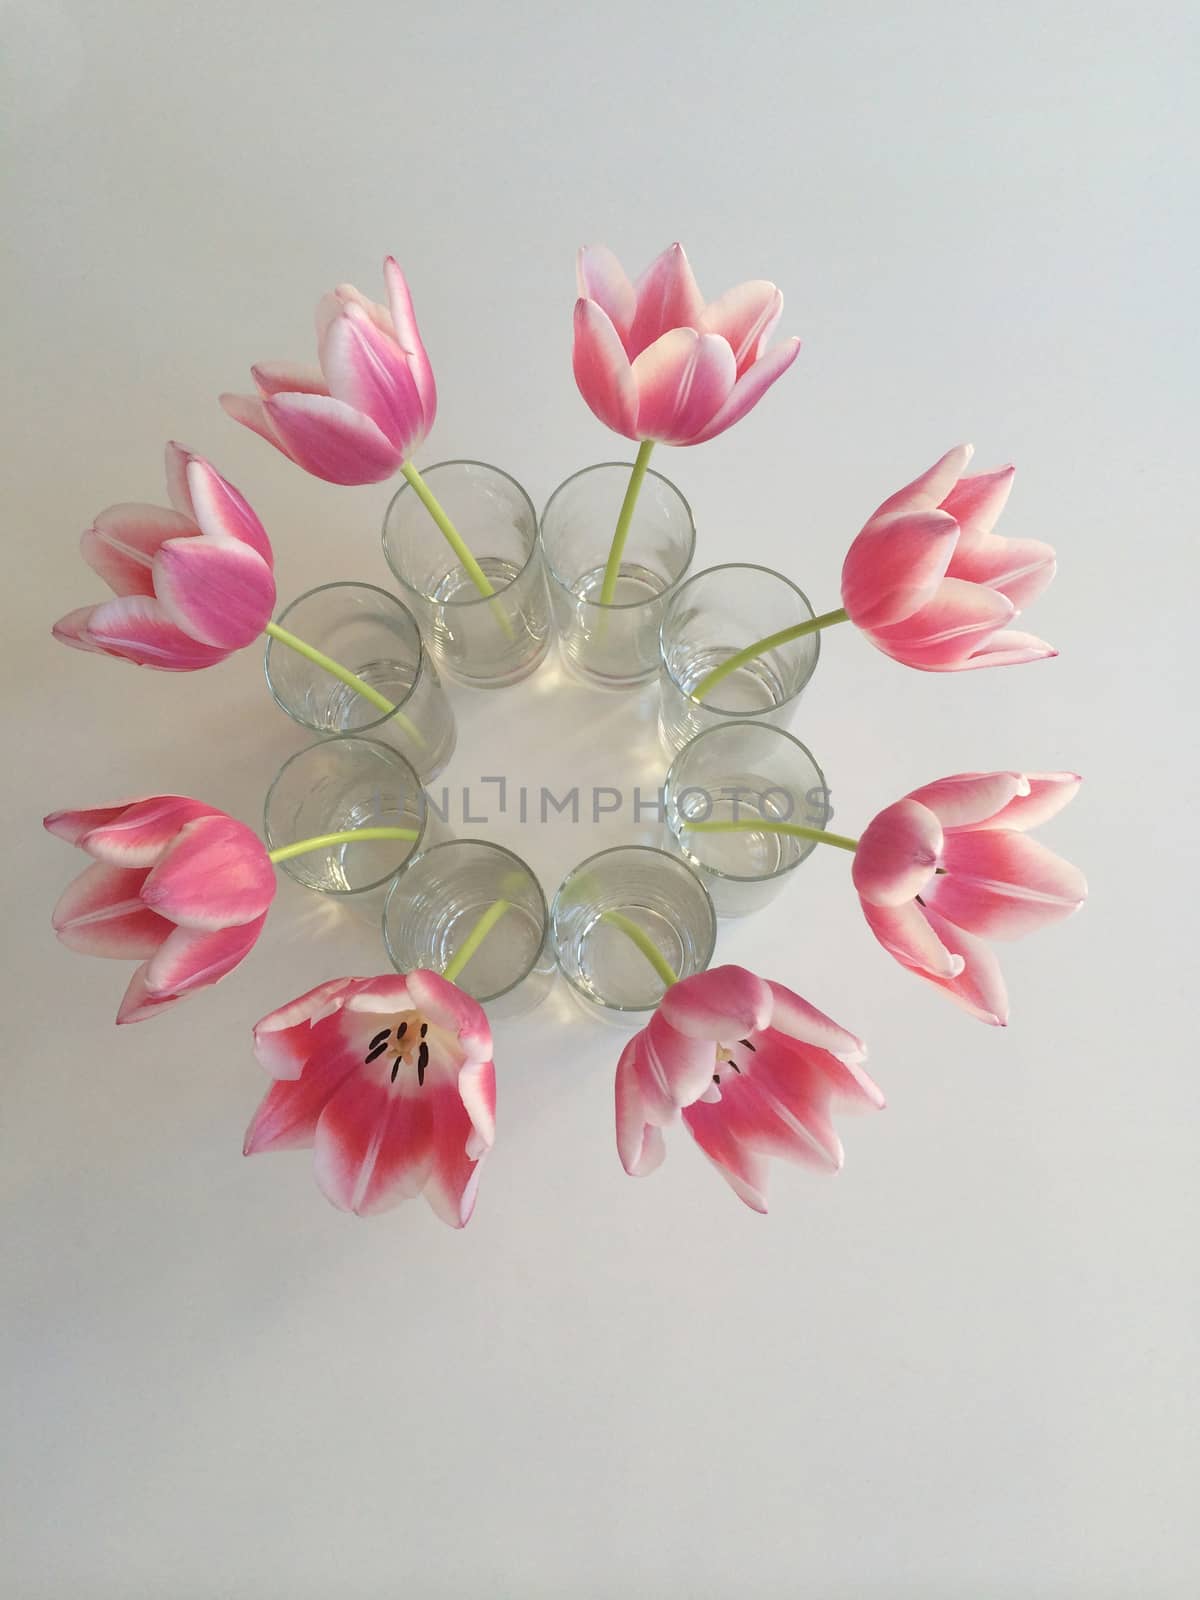 Pink and white tulips in vases